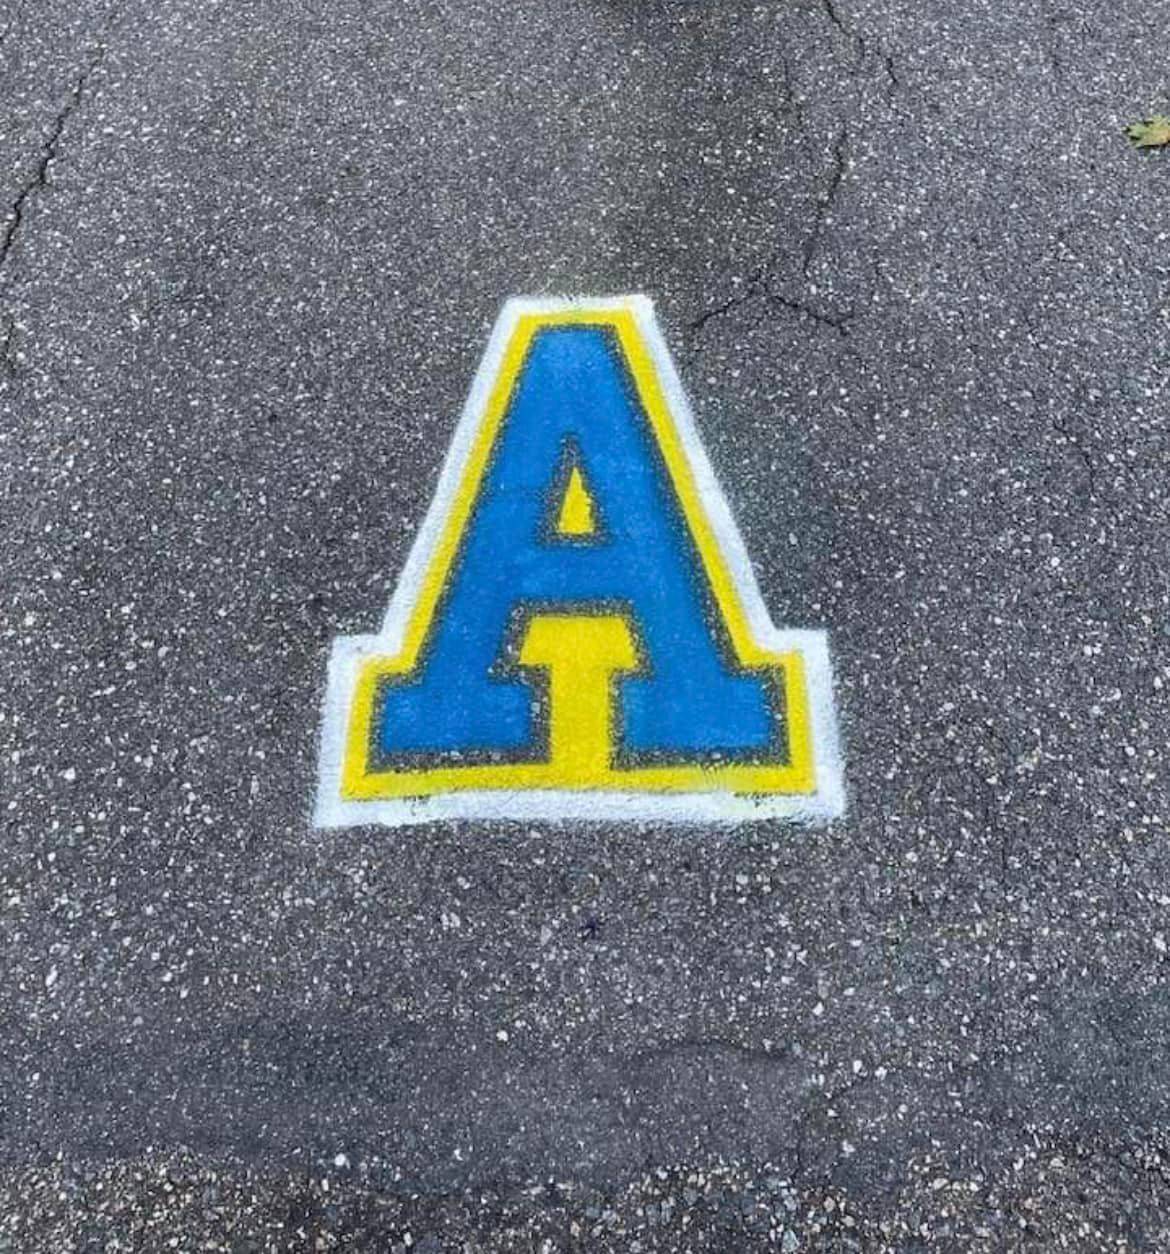 Andover High Girls Soccer Team Raising Funds With Driveway 'A' Painting